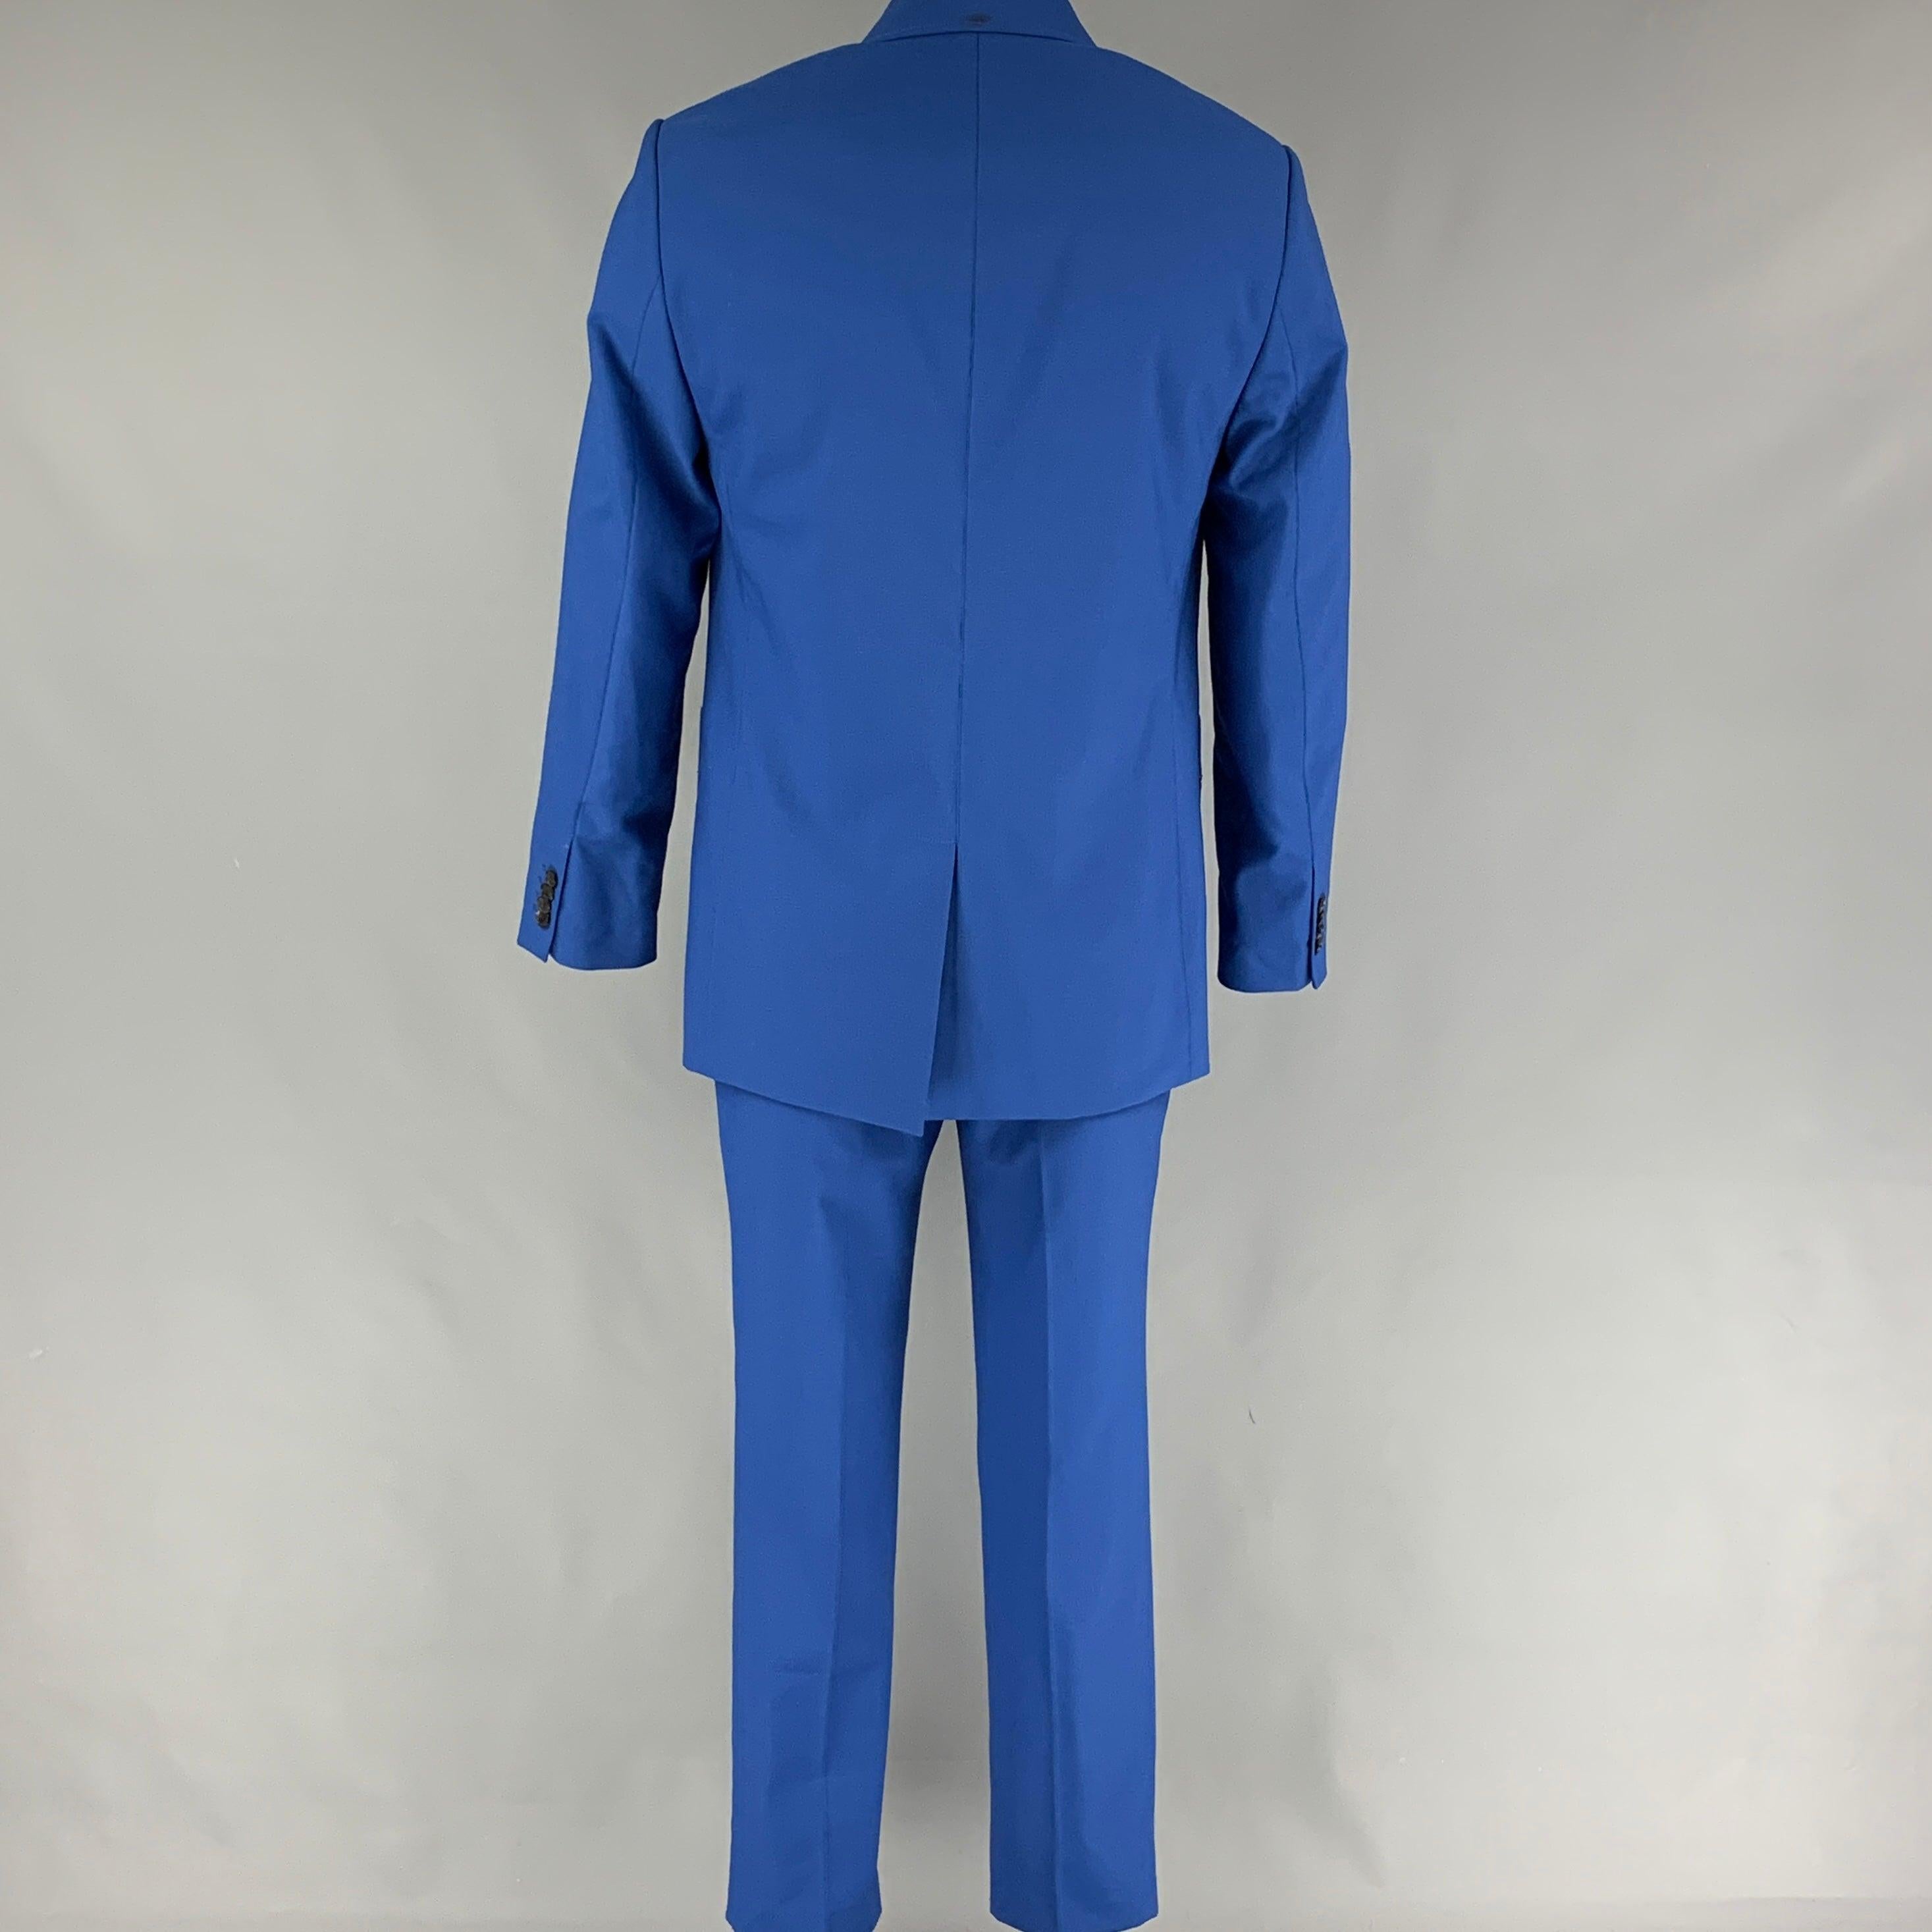 3.1 PHILLIP LIM Size 40 Royal Blue Wool Blend Notch Lapel Suit In Excellent Condition For Sale In San Francisco, CA